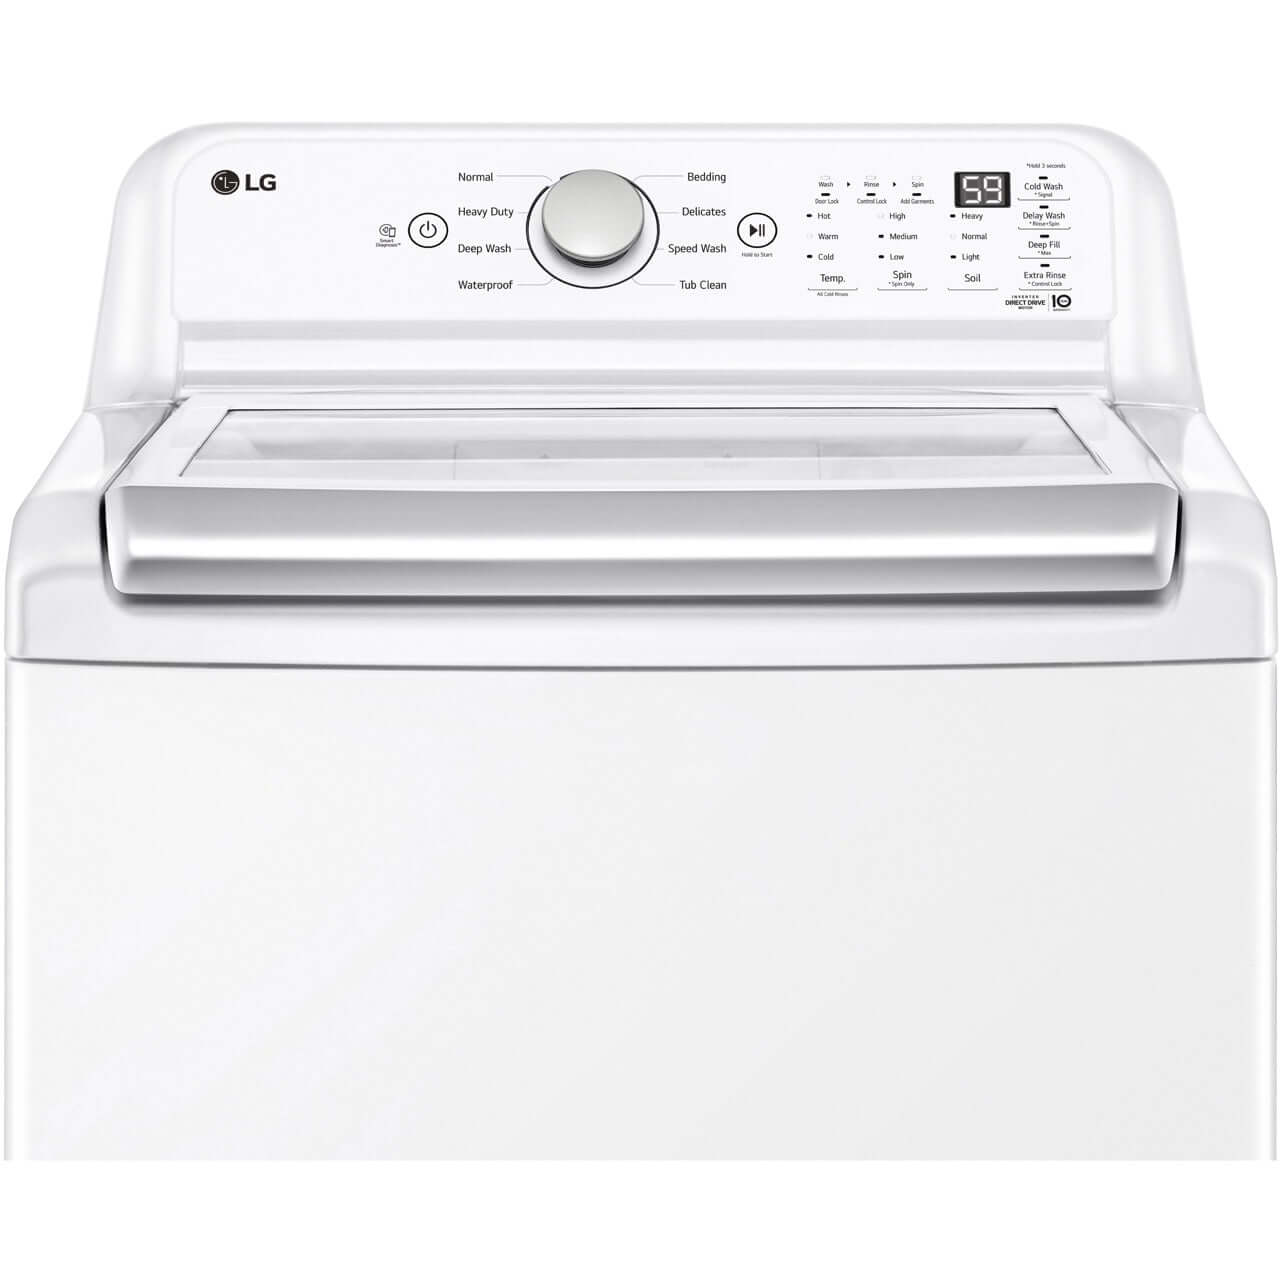 LG 4.8-Cu. Ft. Mega Capacity Top Load Washer with 4-Way Agitator and TurboDrum Technology (WT7155CW)